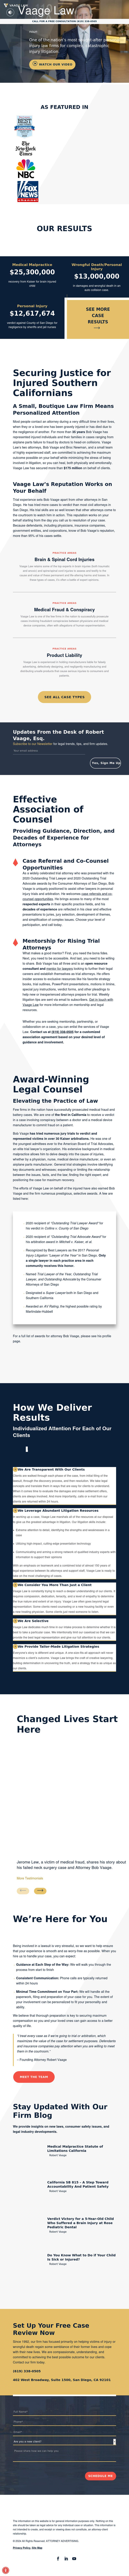 Law Offices of Robert Vaage - San Diego CA Lawyers